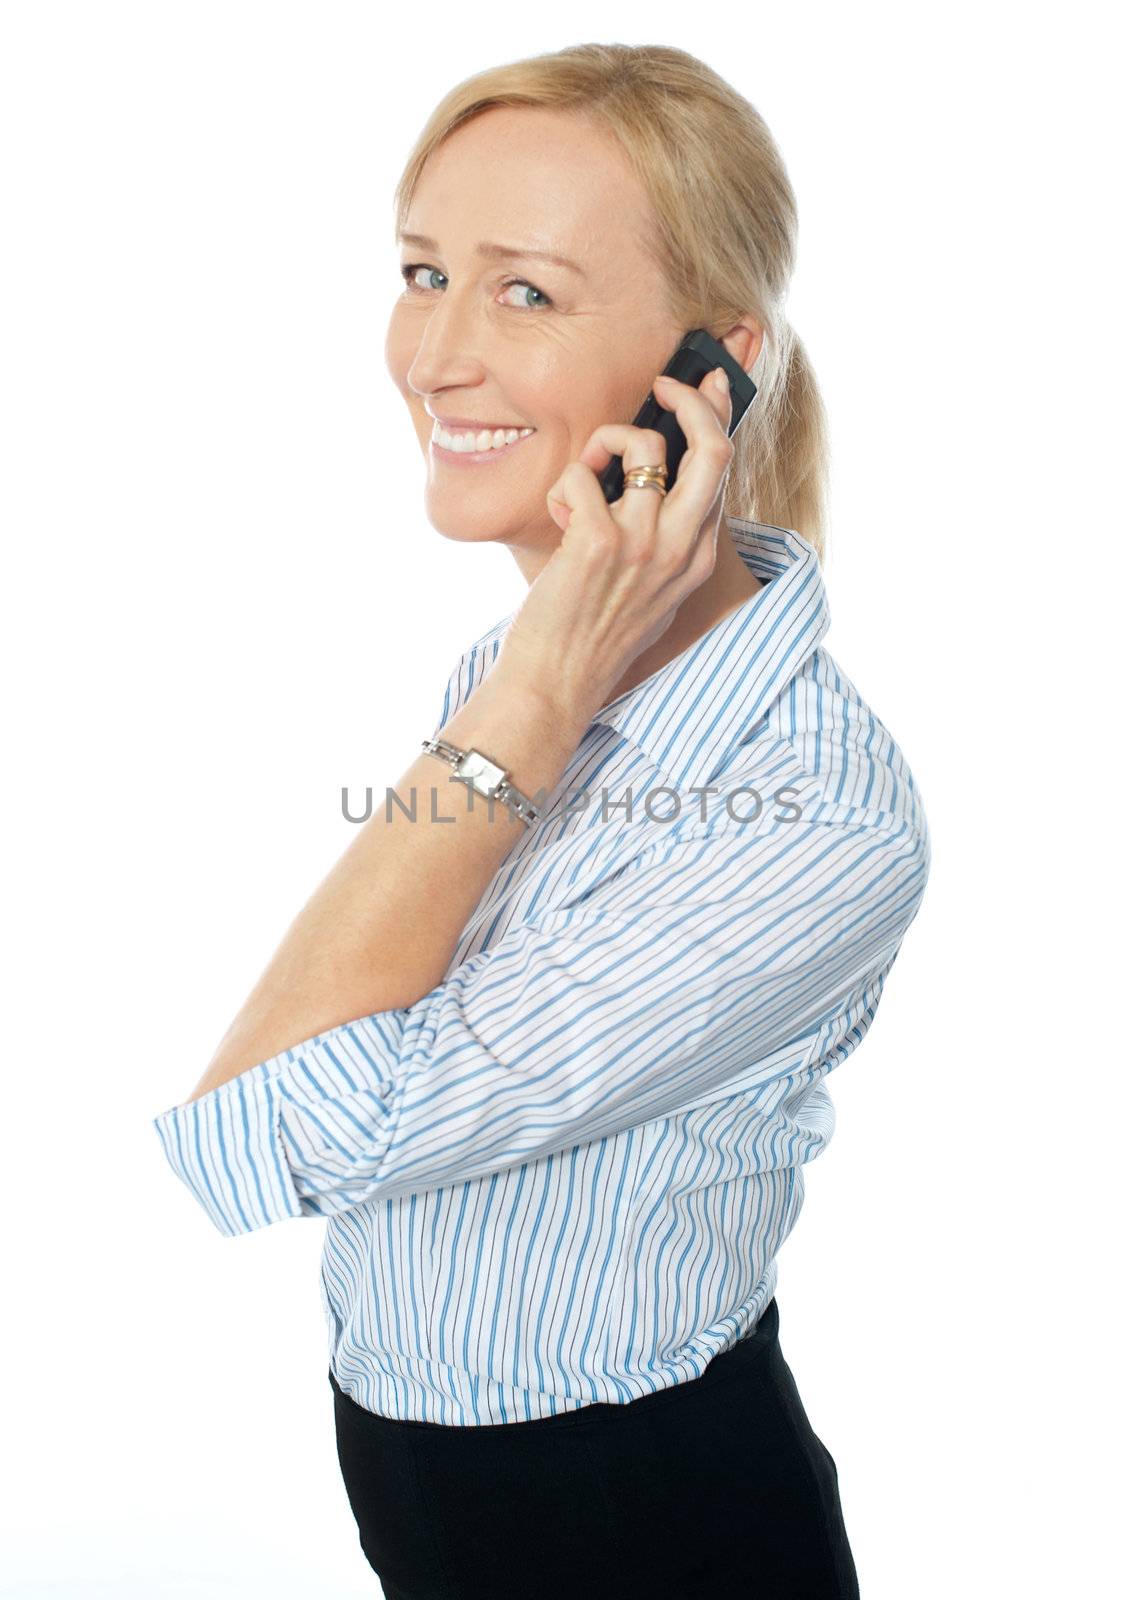 Businesswoman talking on phone and smiling at camera